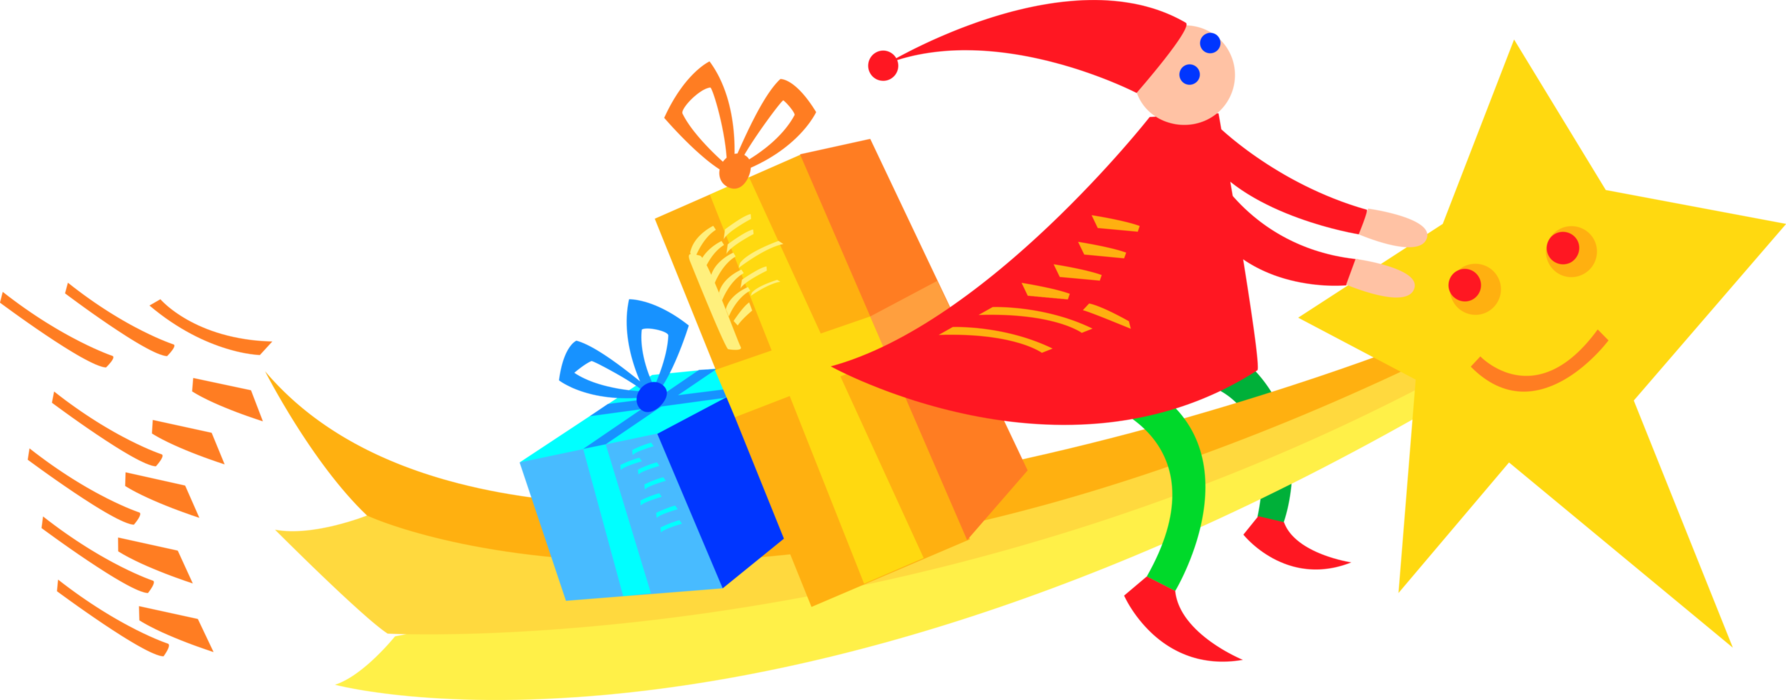 Vector Illustration of Festive Season Christmas Mythological Elf Creature Rides Shooting Star with Gift Wrapped Presents